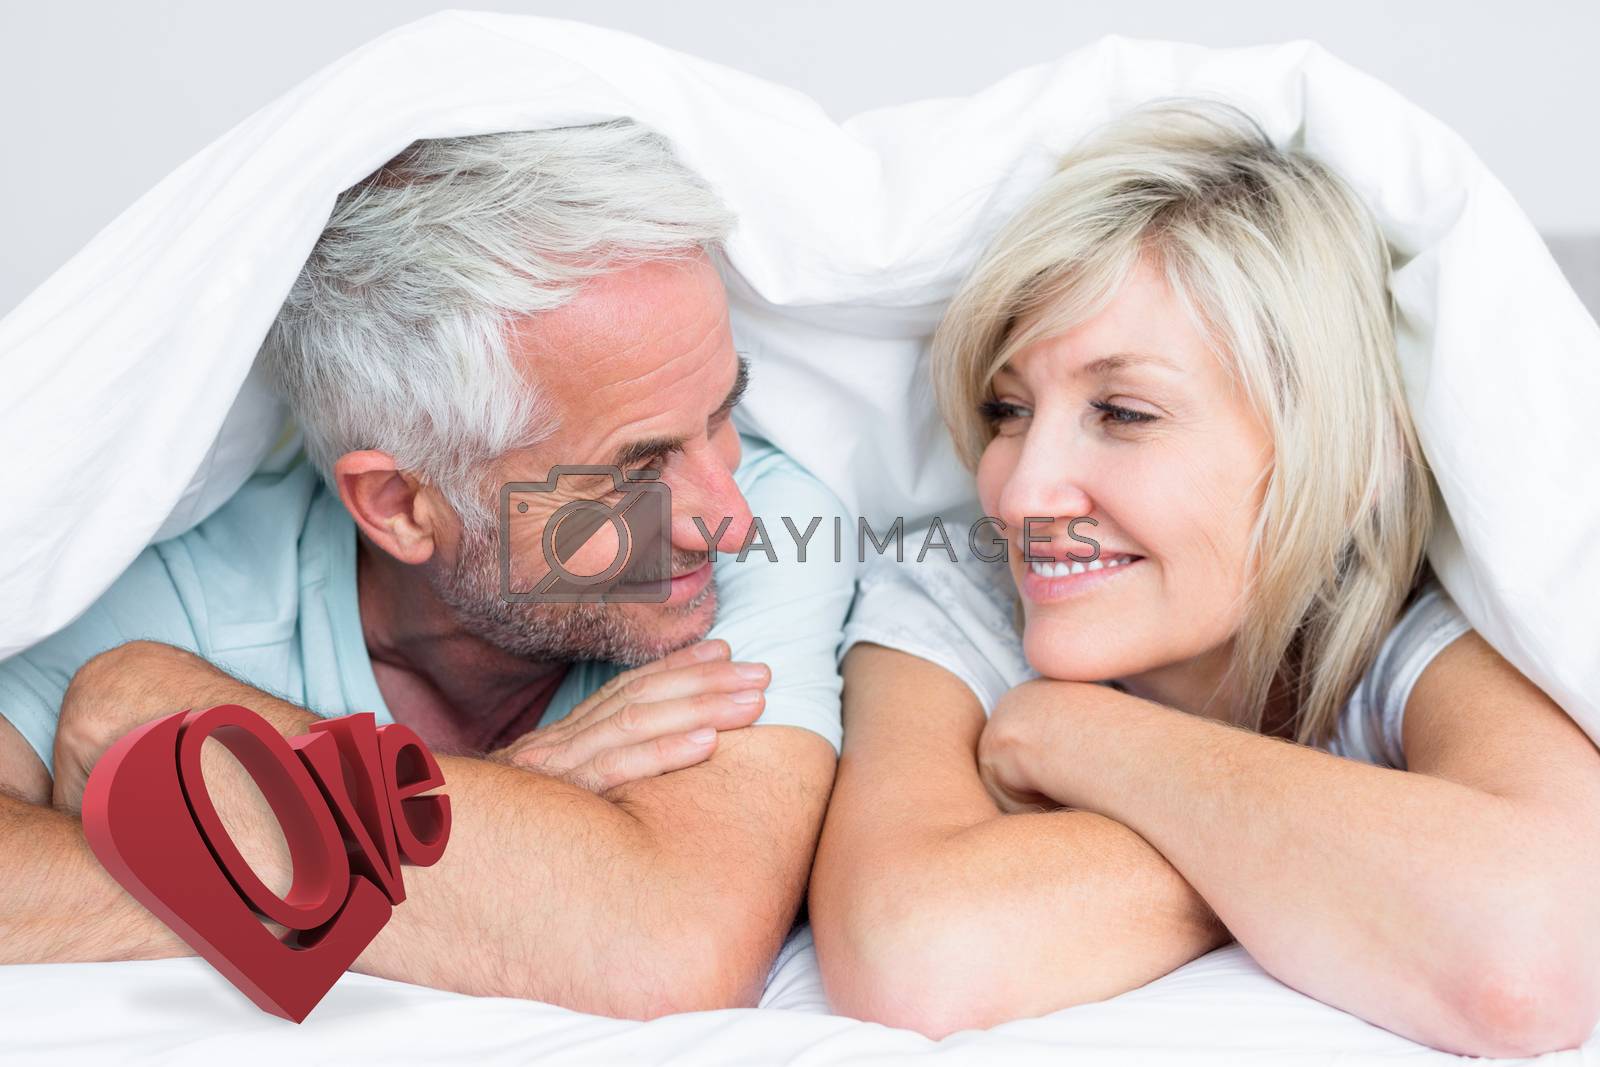 Royalty free image of Composite image of closeup of a mature couple lying in bed by Wavebreakmedia